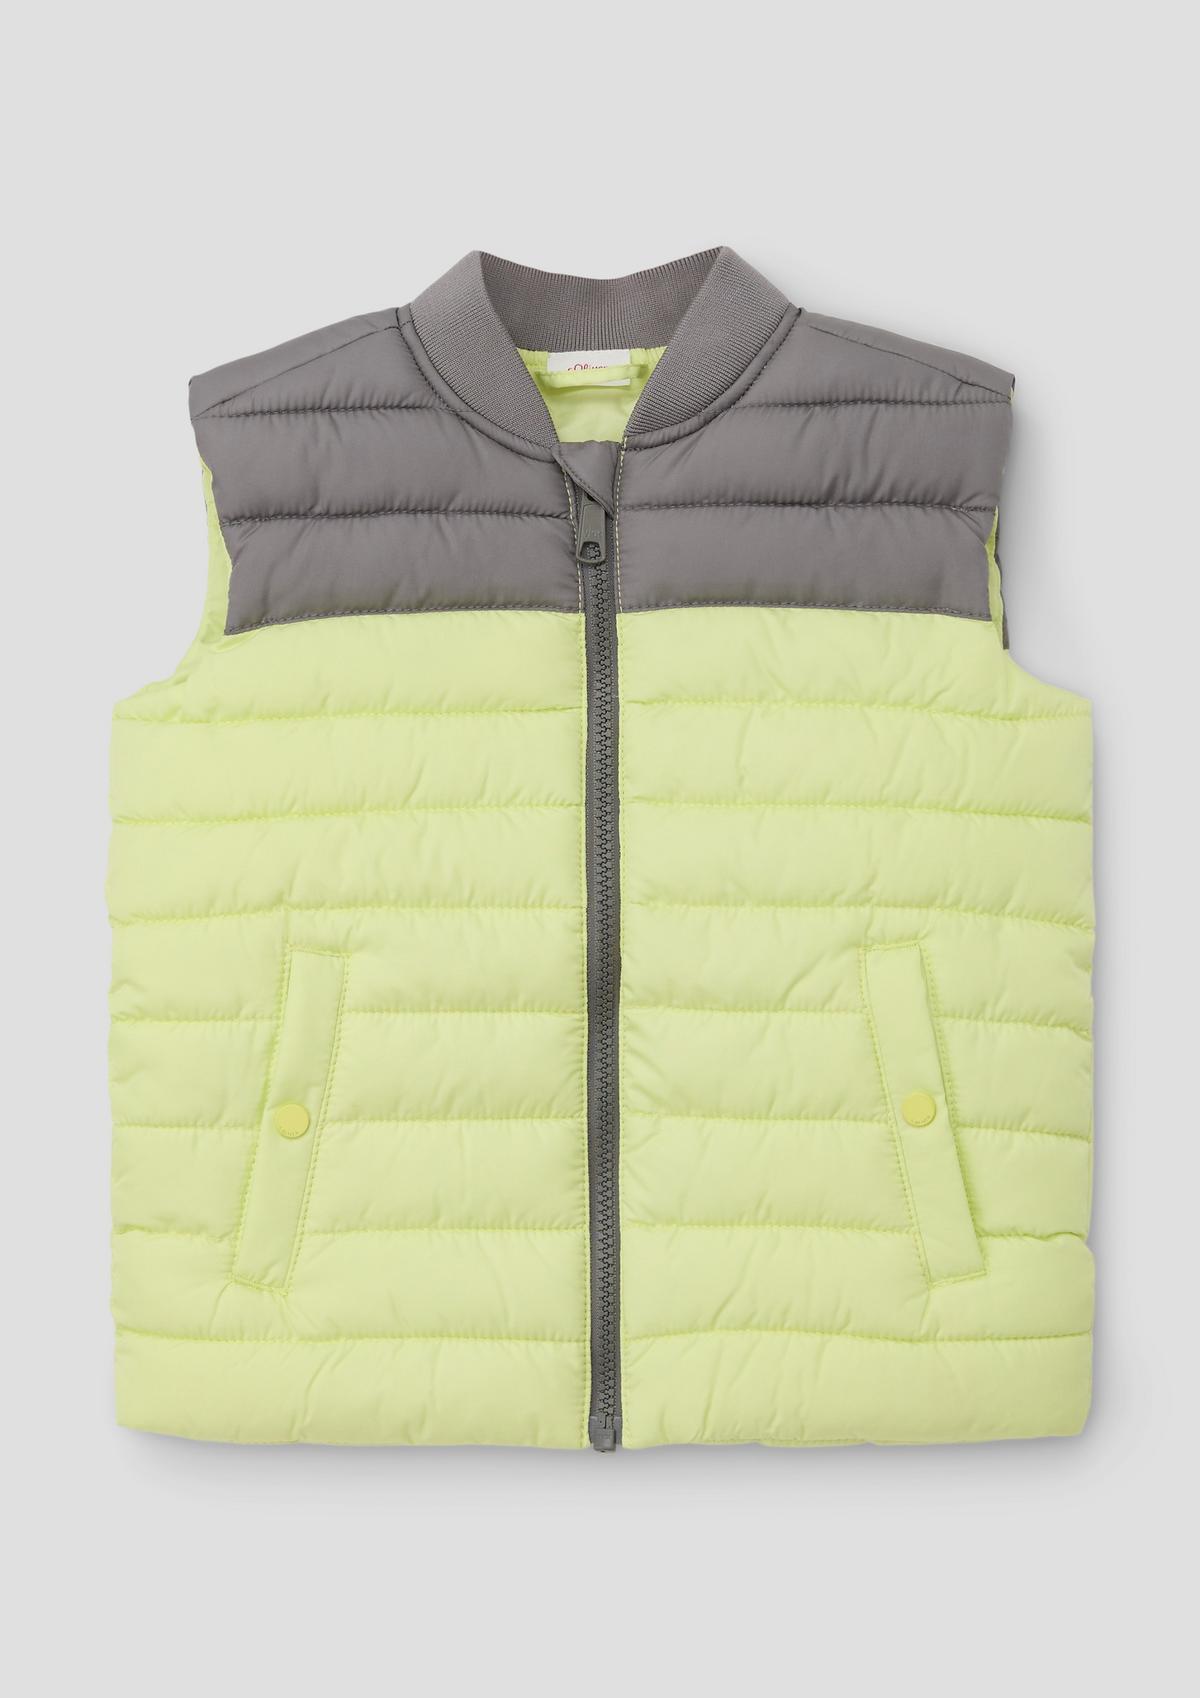 s.Oliver Body warmer with a stand-up collar